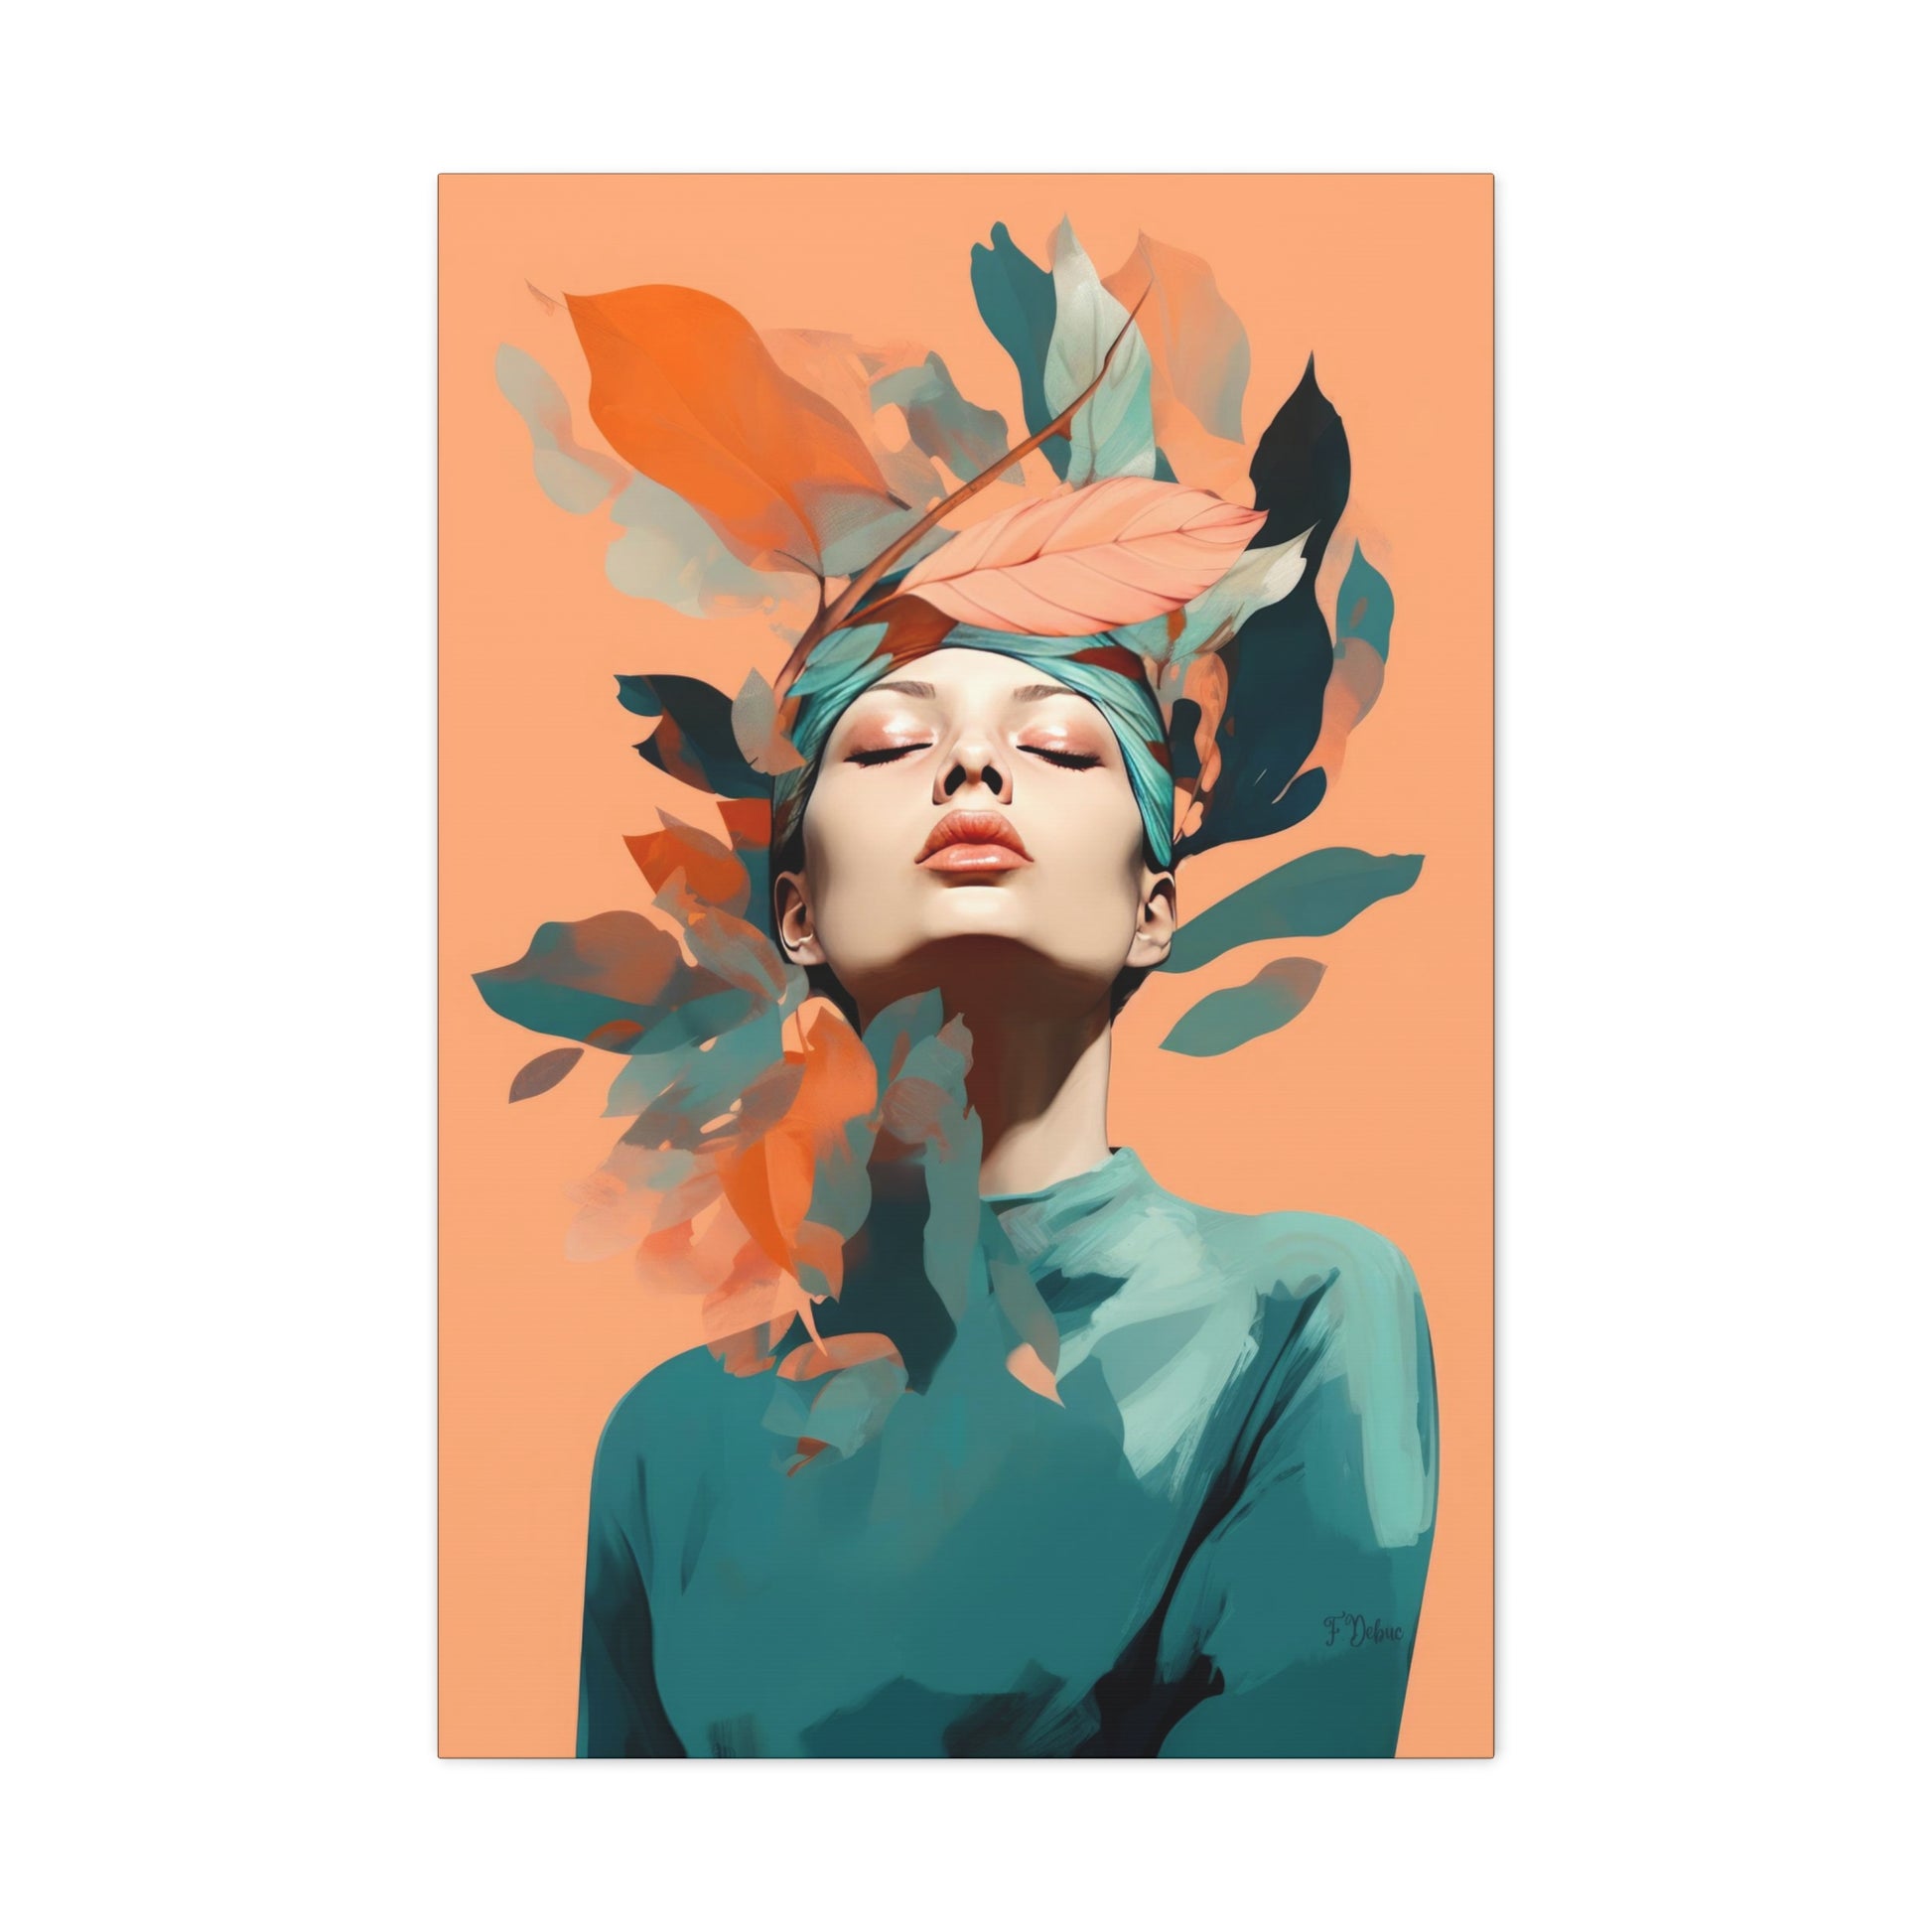 This portrait of a woman wearing a leaves crown comes to life in muted tones, a perfect addition to your space.